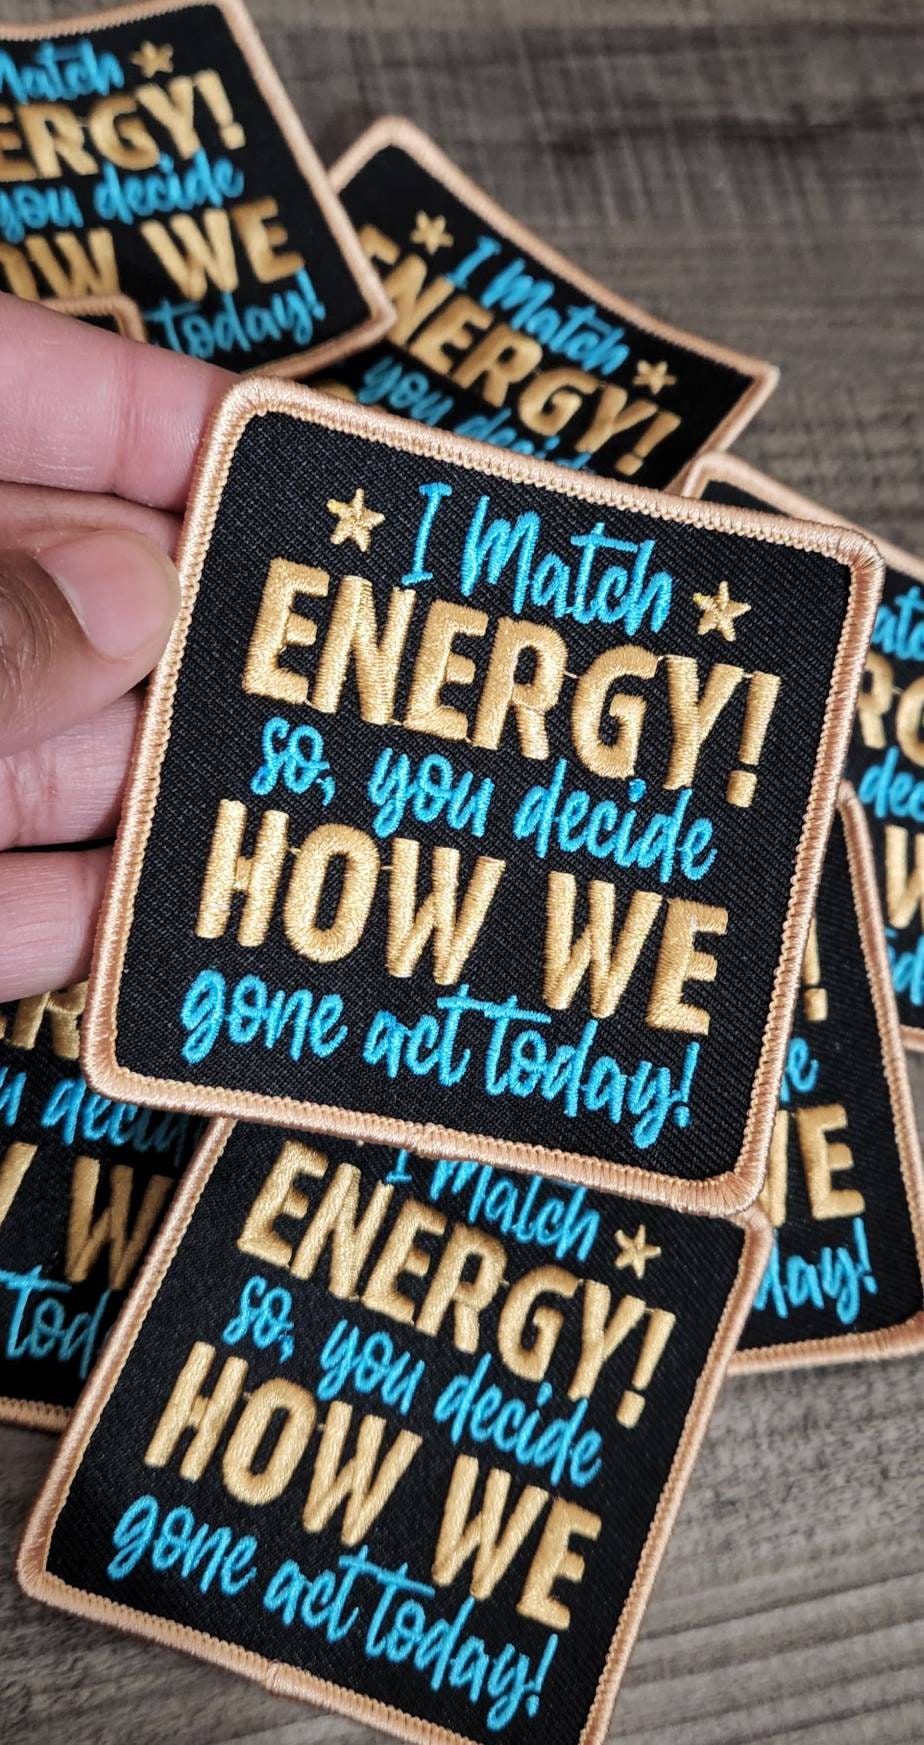 Cool Statement Patch "I Match Energy, You Decide How We Gone Act" Iron-on Patch, Size 3"x3", DIY Applique; Small Jacket Patch; Morale Patch